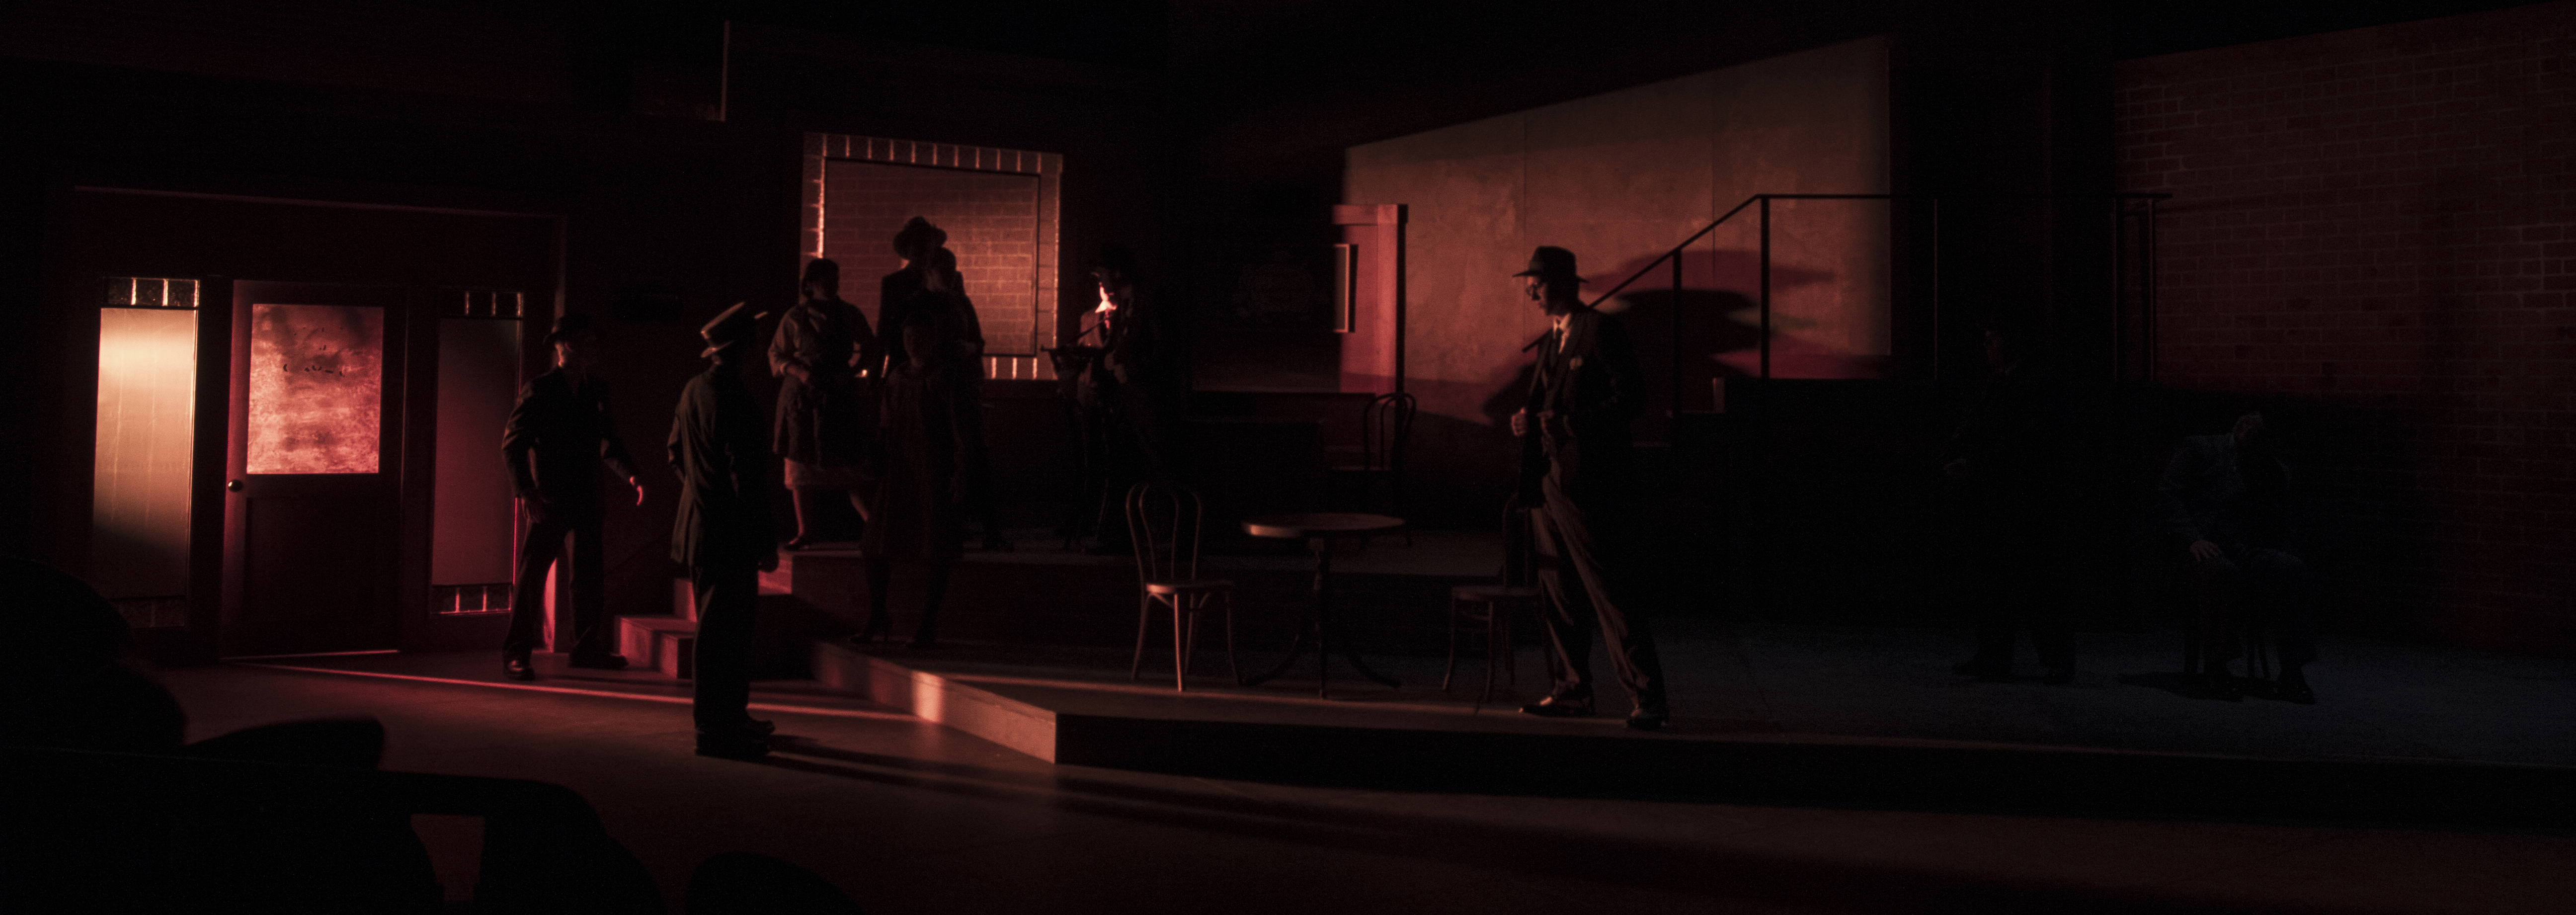 Header Image: The Resisable Rise of Arturo Ui (Dark figures in low red light)